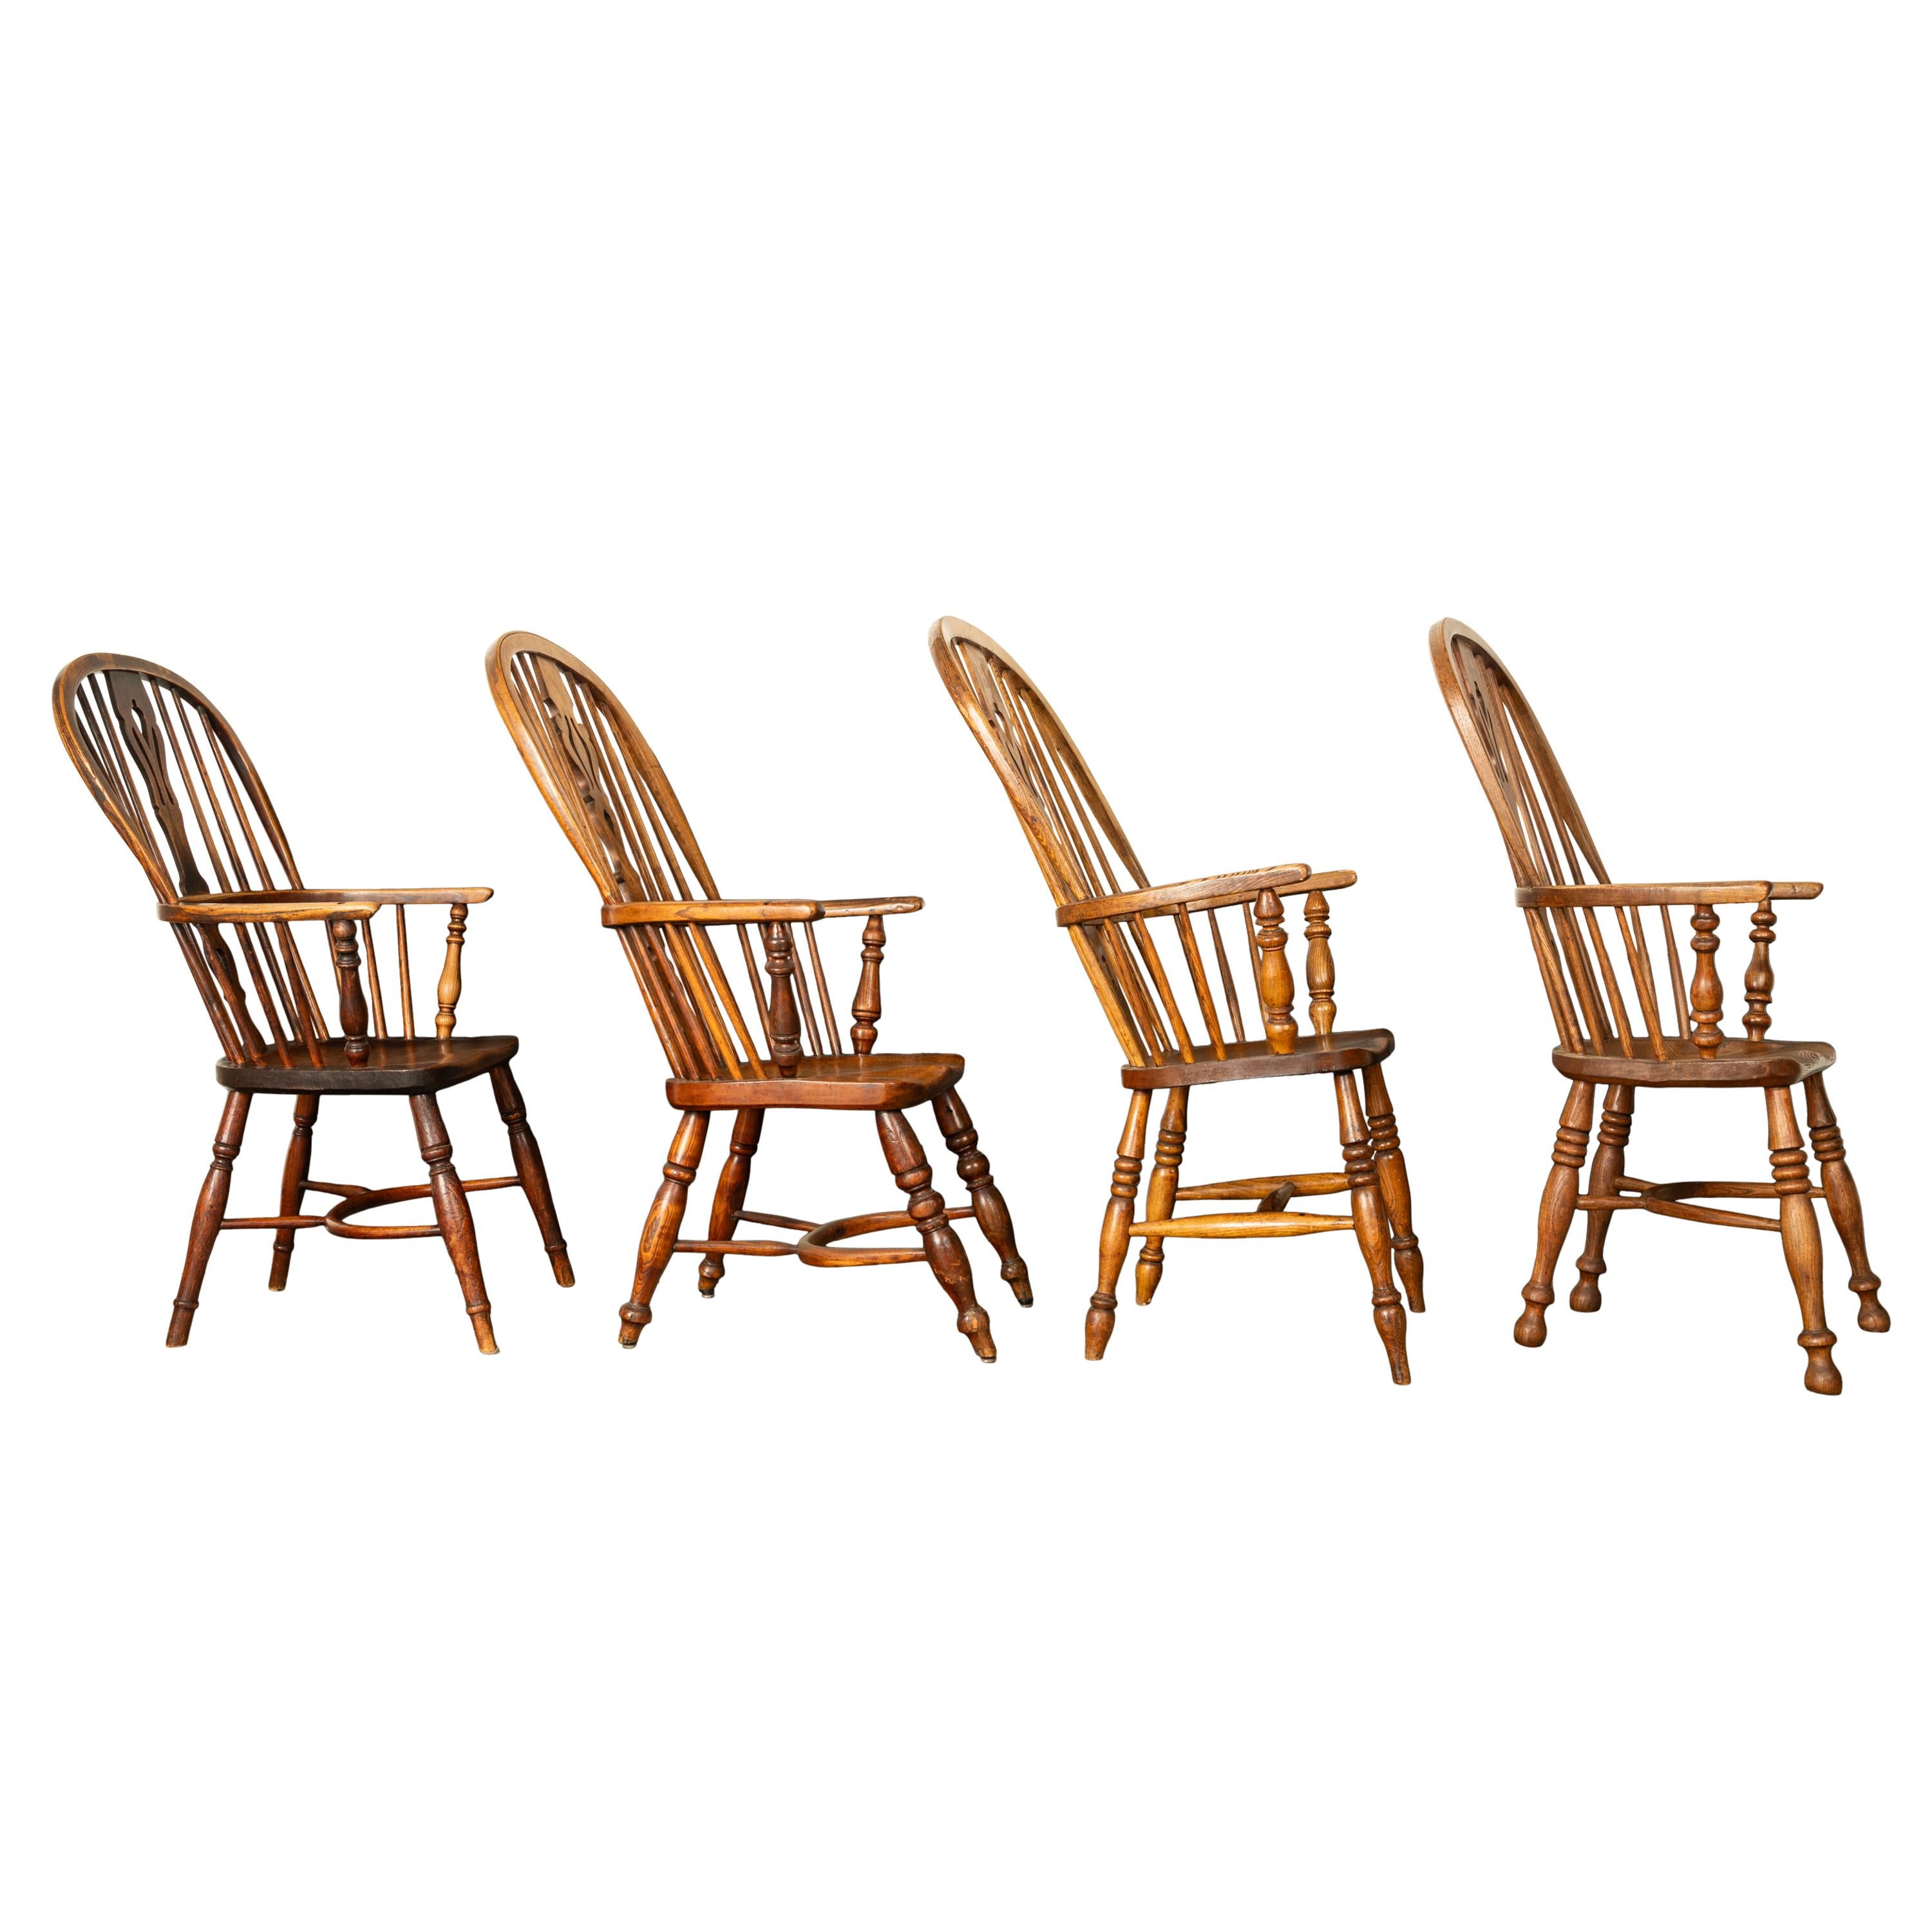 Set 4 Antique 19thC High-backed English Ash Elm Country Windsor Arm Chairs 1840  For Sale 9